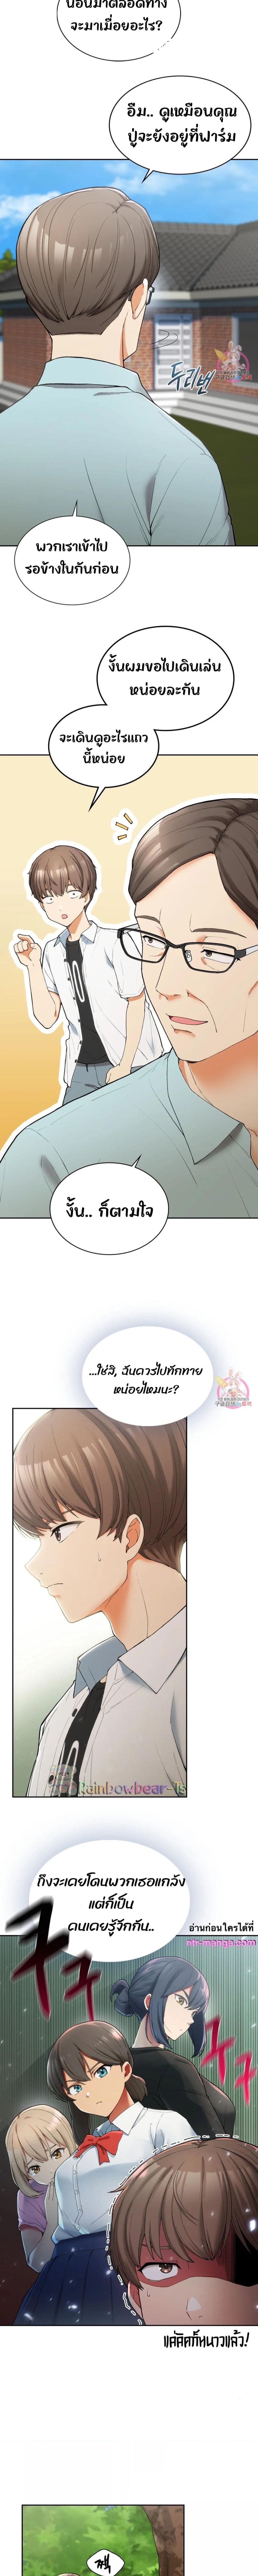 Shall We Live Together in the Country ตอนที่ 1 ภาพ 10